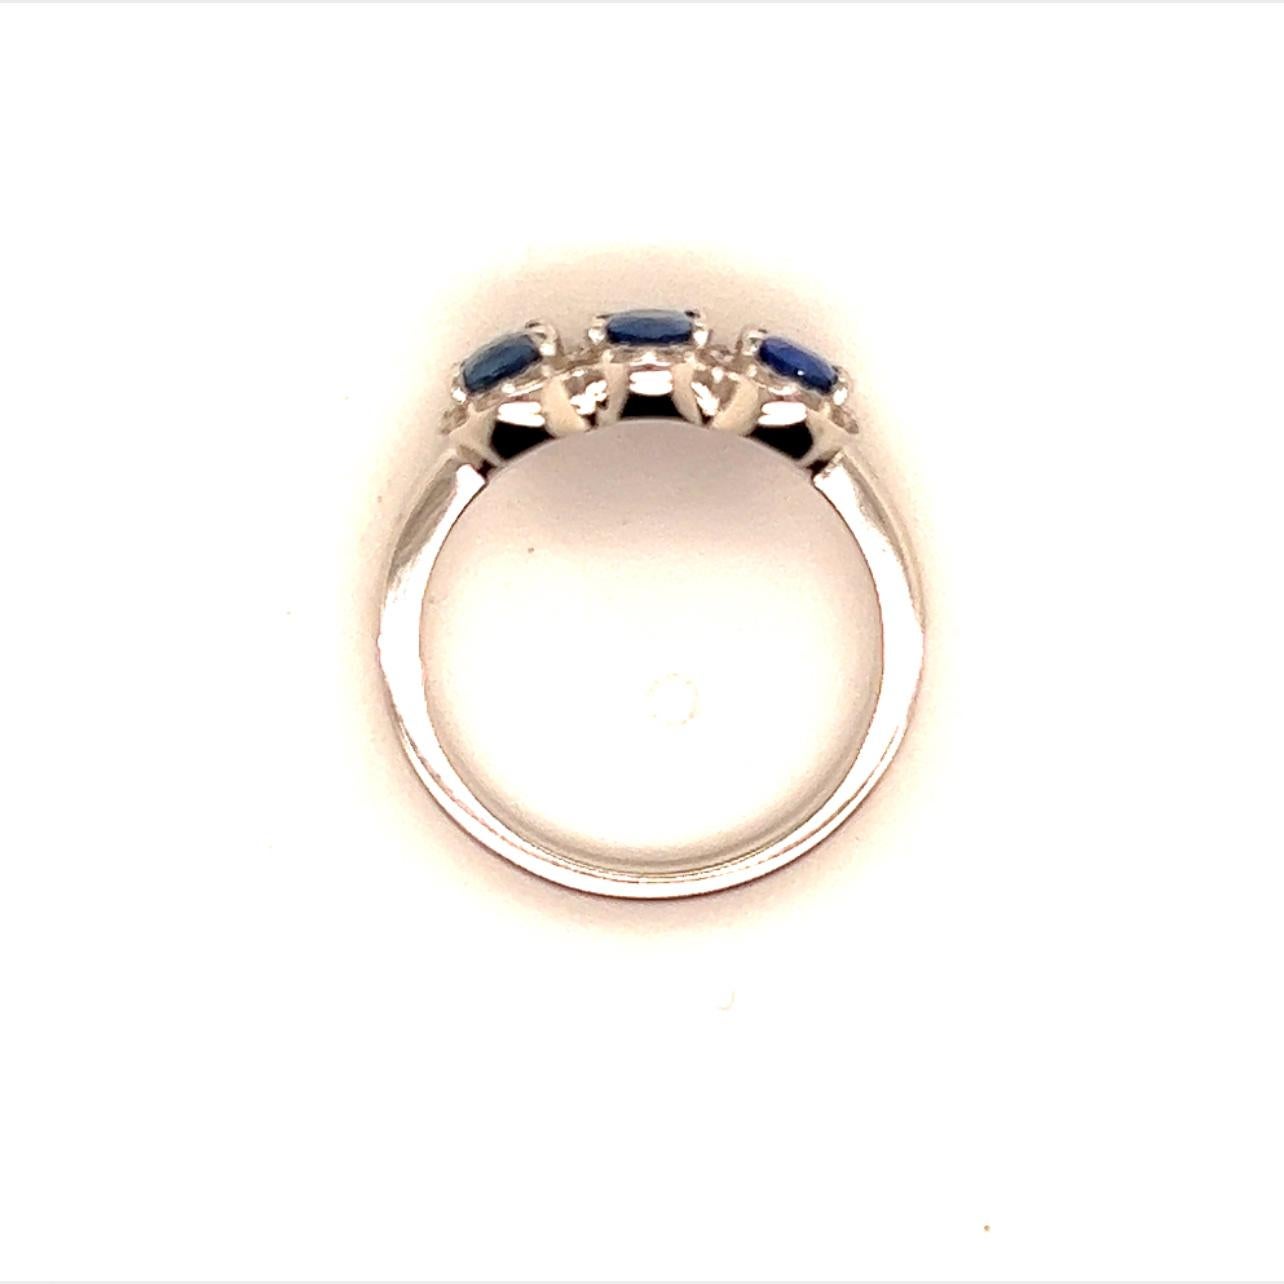 Natural Sapphire Diamond Ring 7 14k W Gold 1.67 TCW Certified For Sale 1